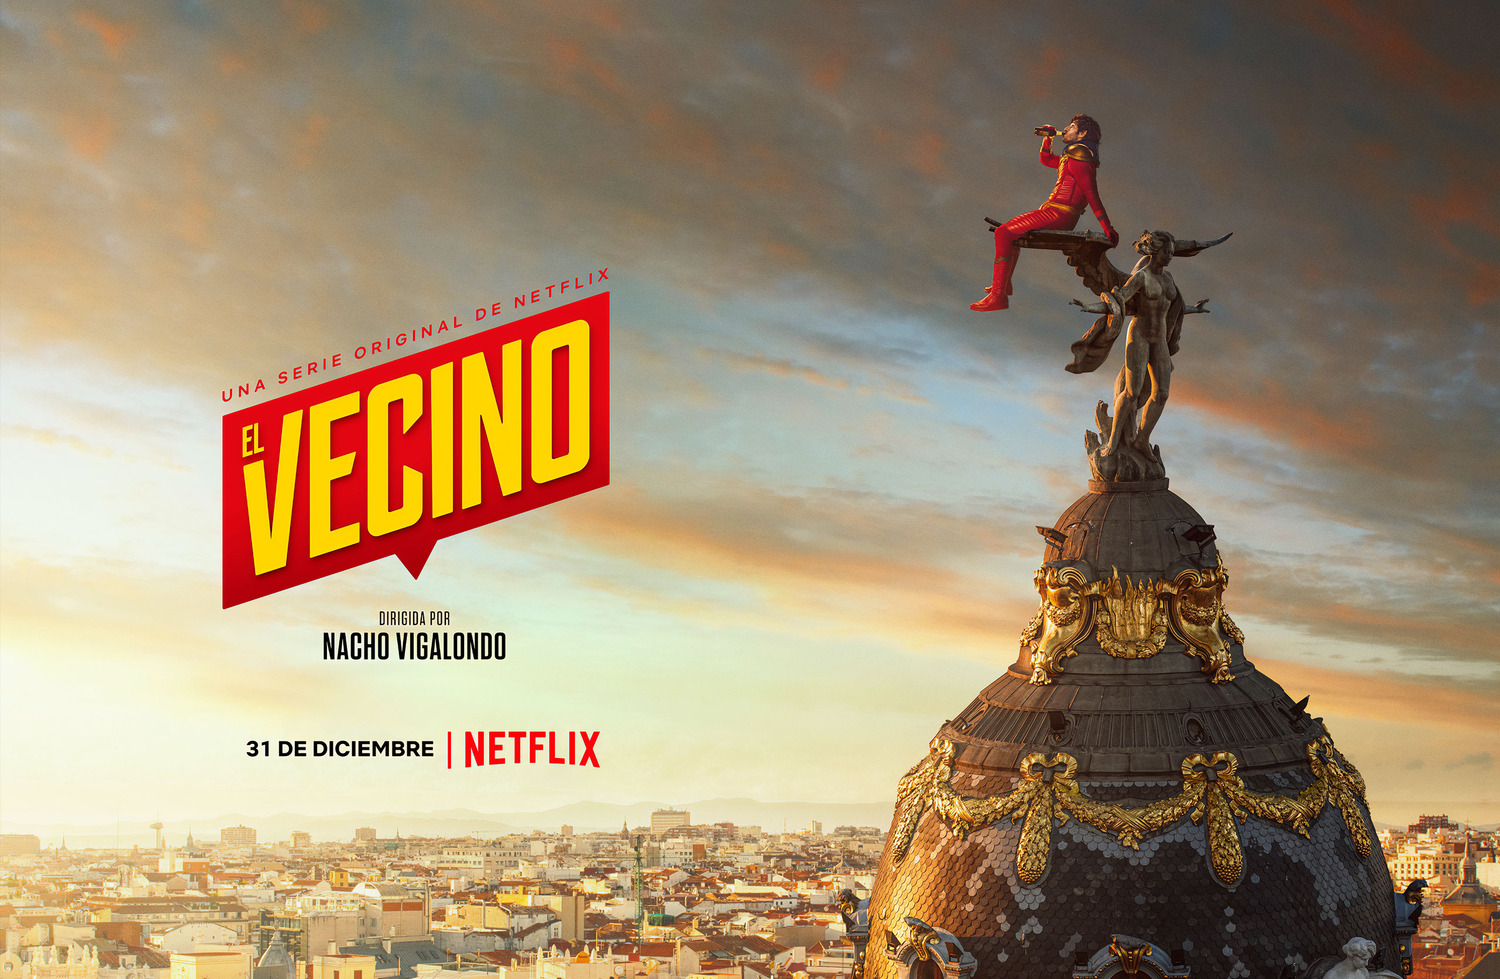 Extra Large TV Poster Image for El vecino (#9 of 9)